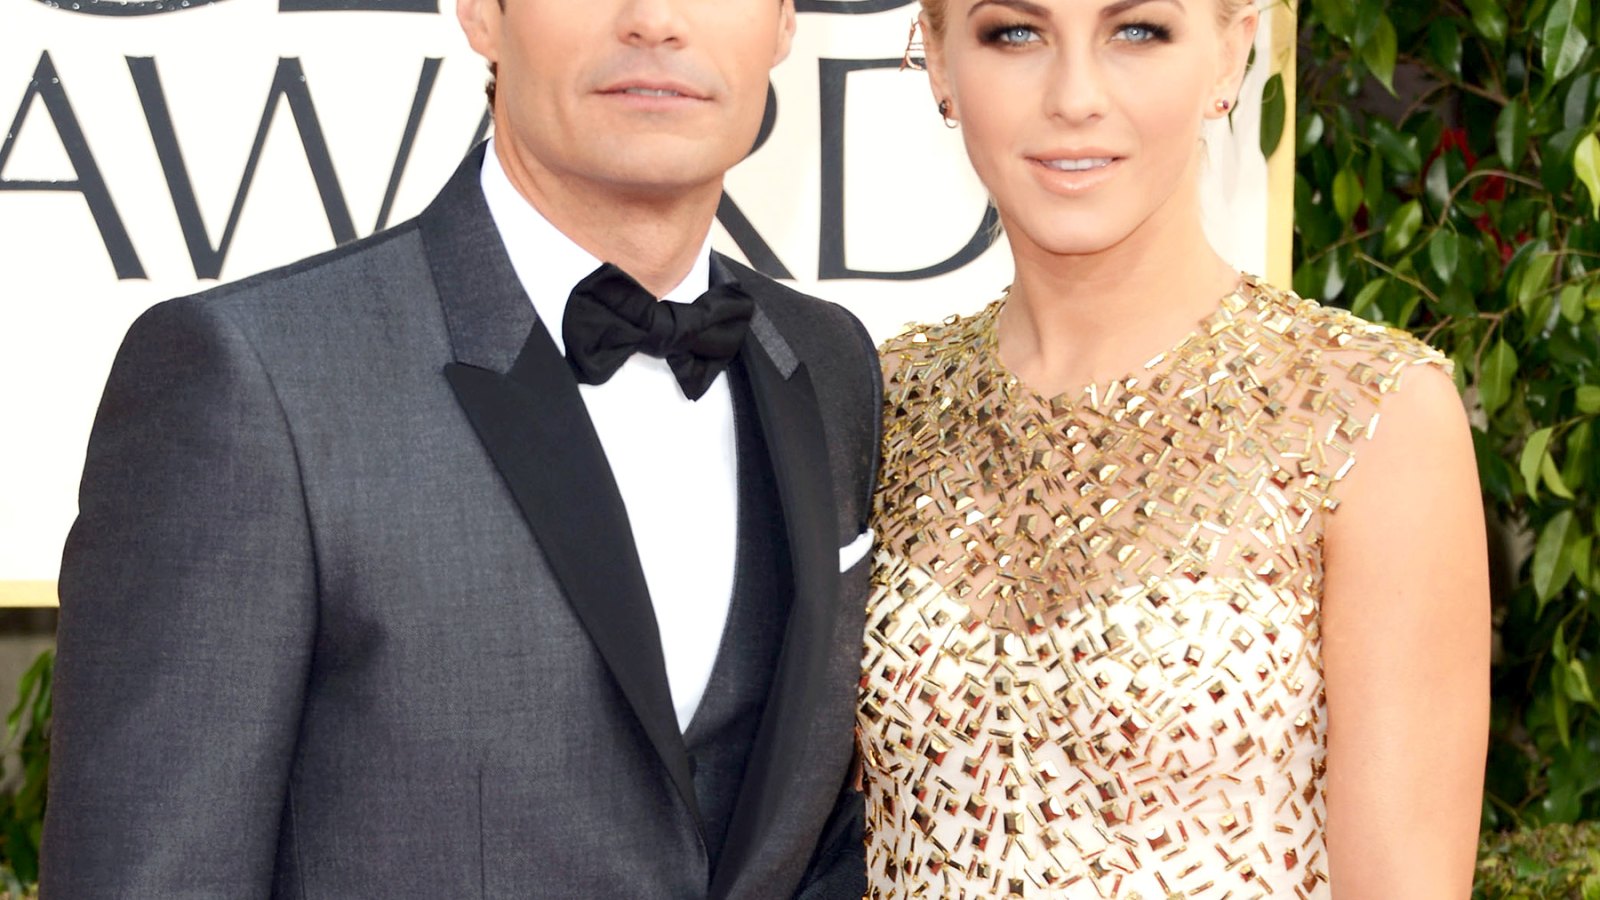 Ryan Seacrest and Julianne Hough at the 70th Annual Golden Globe Award